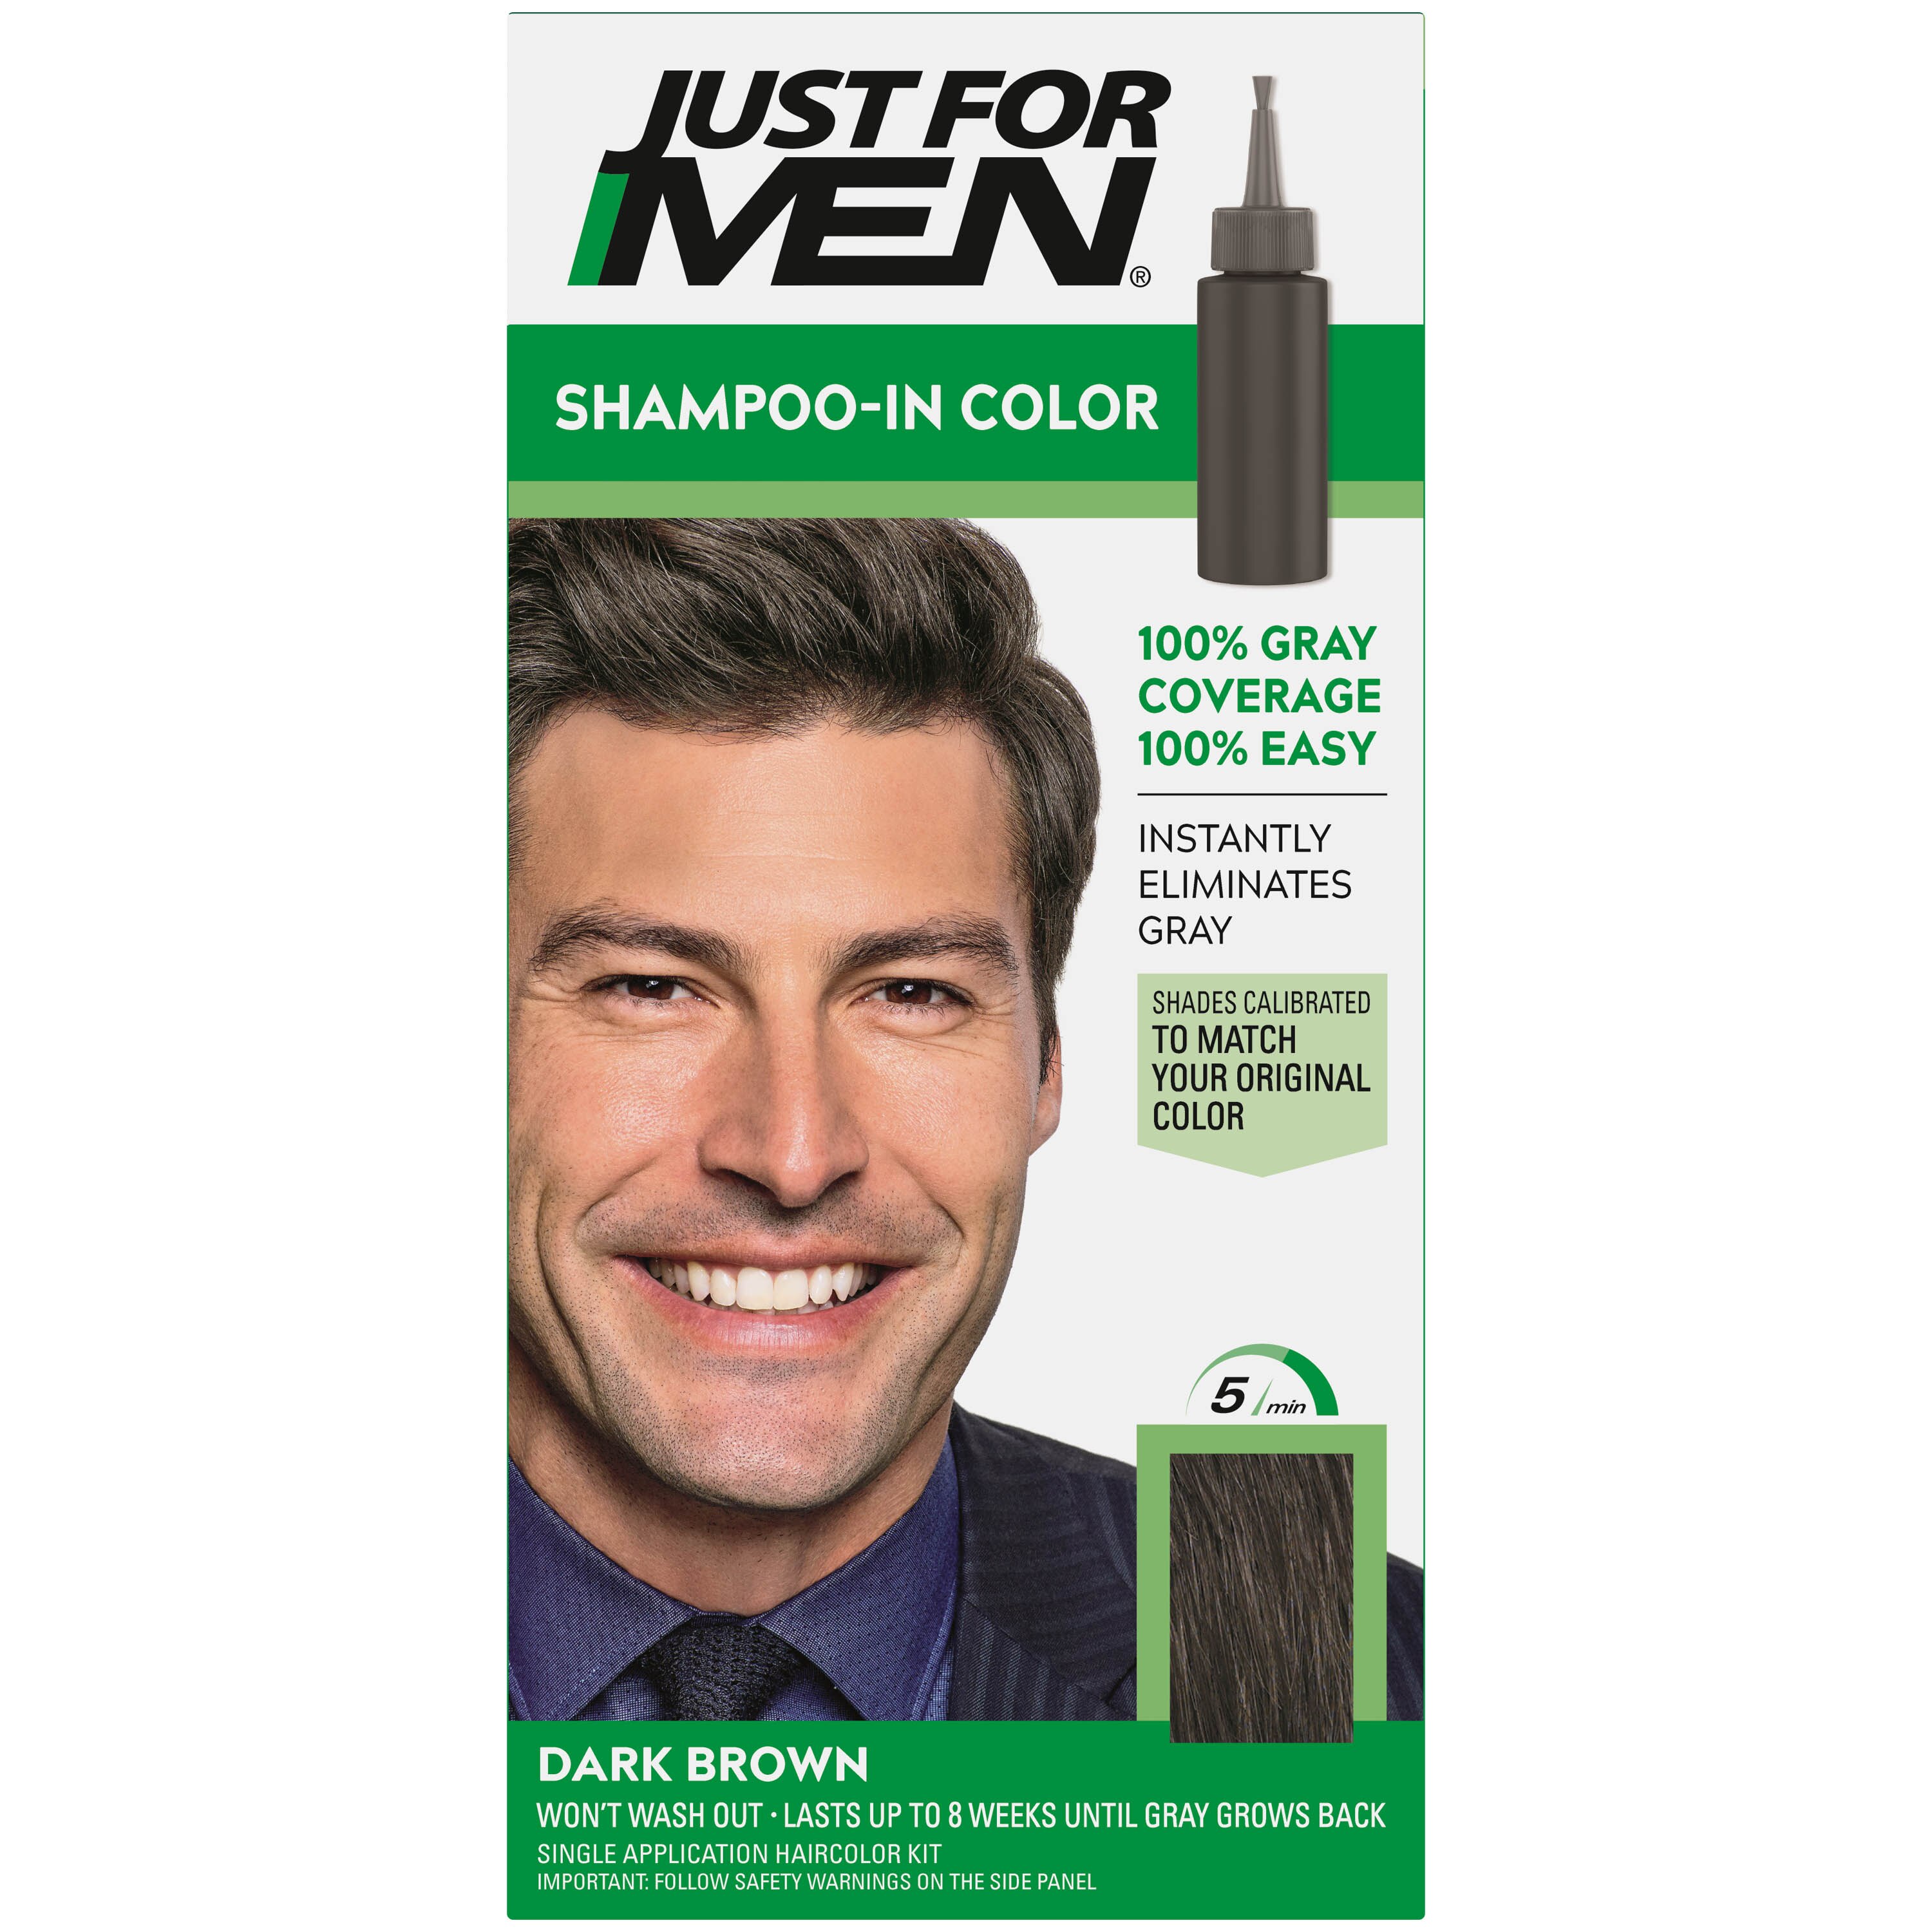 Just For Men Shampoo-In Color, Gray Hair Coloring for Men | Pick Up In  Store TODAY at CVS